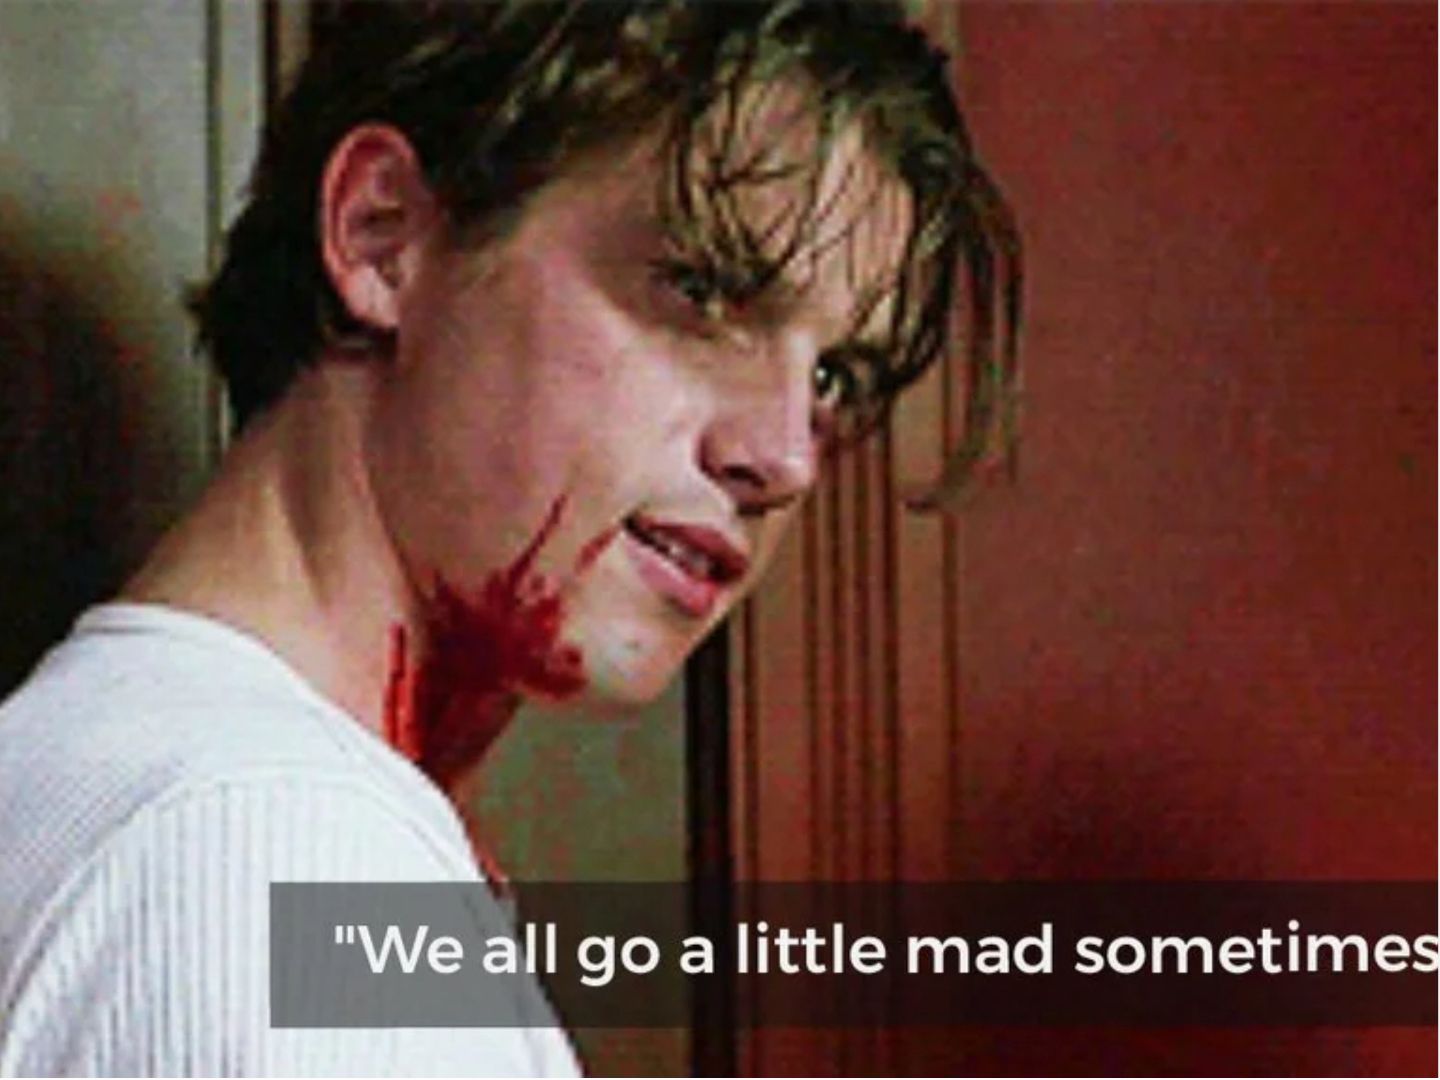 Meme about Billy Loomis from Scream. 